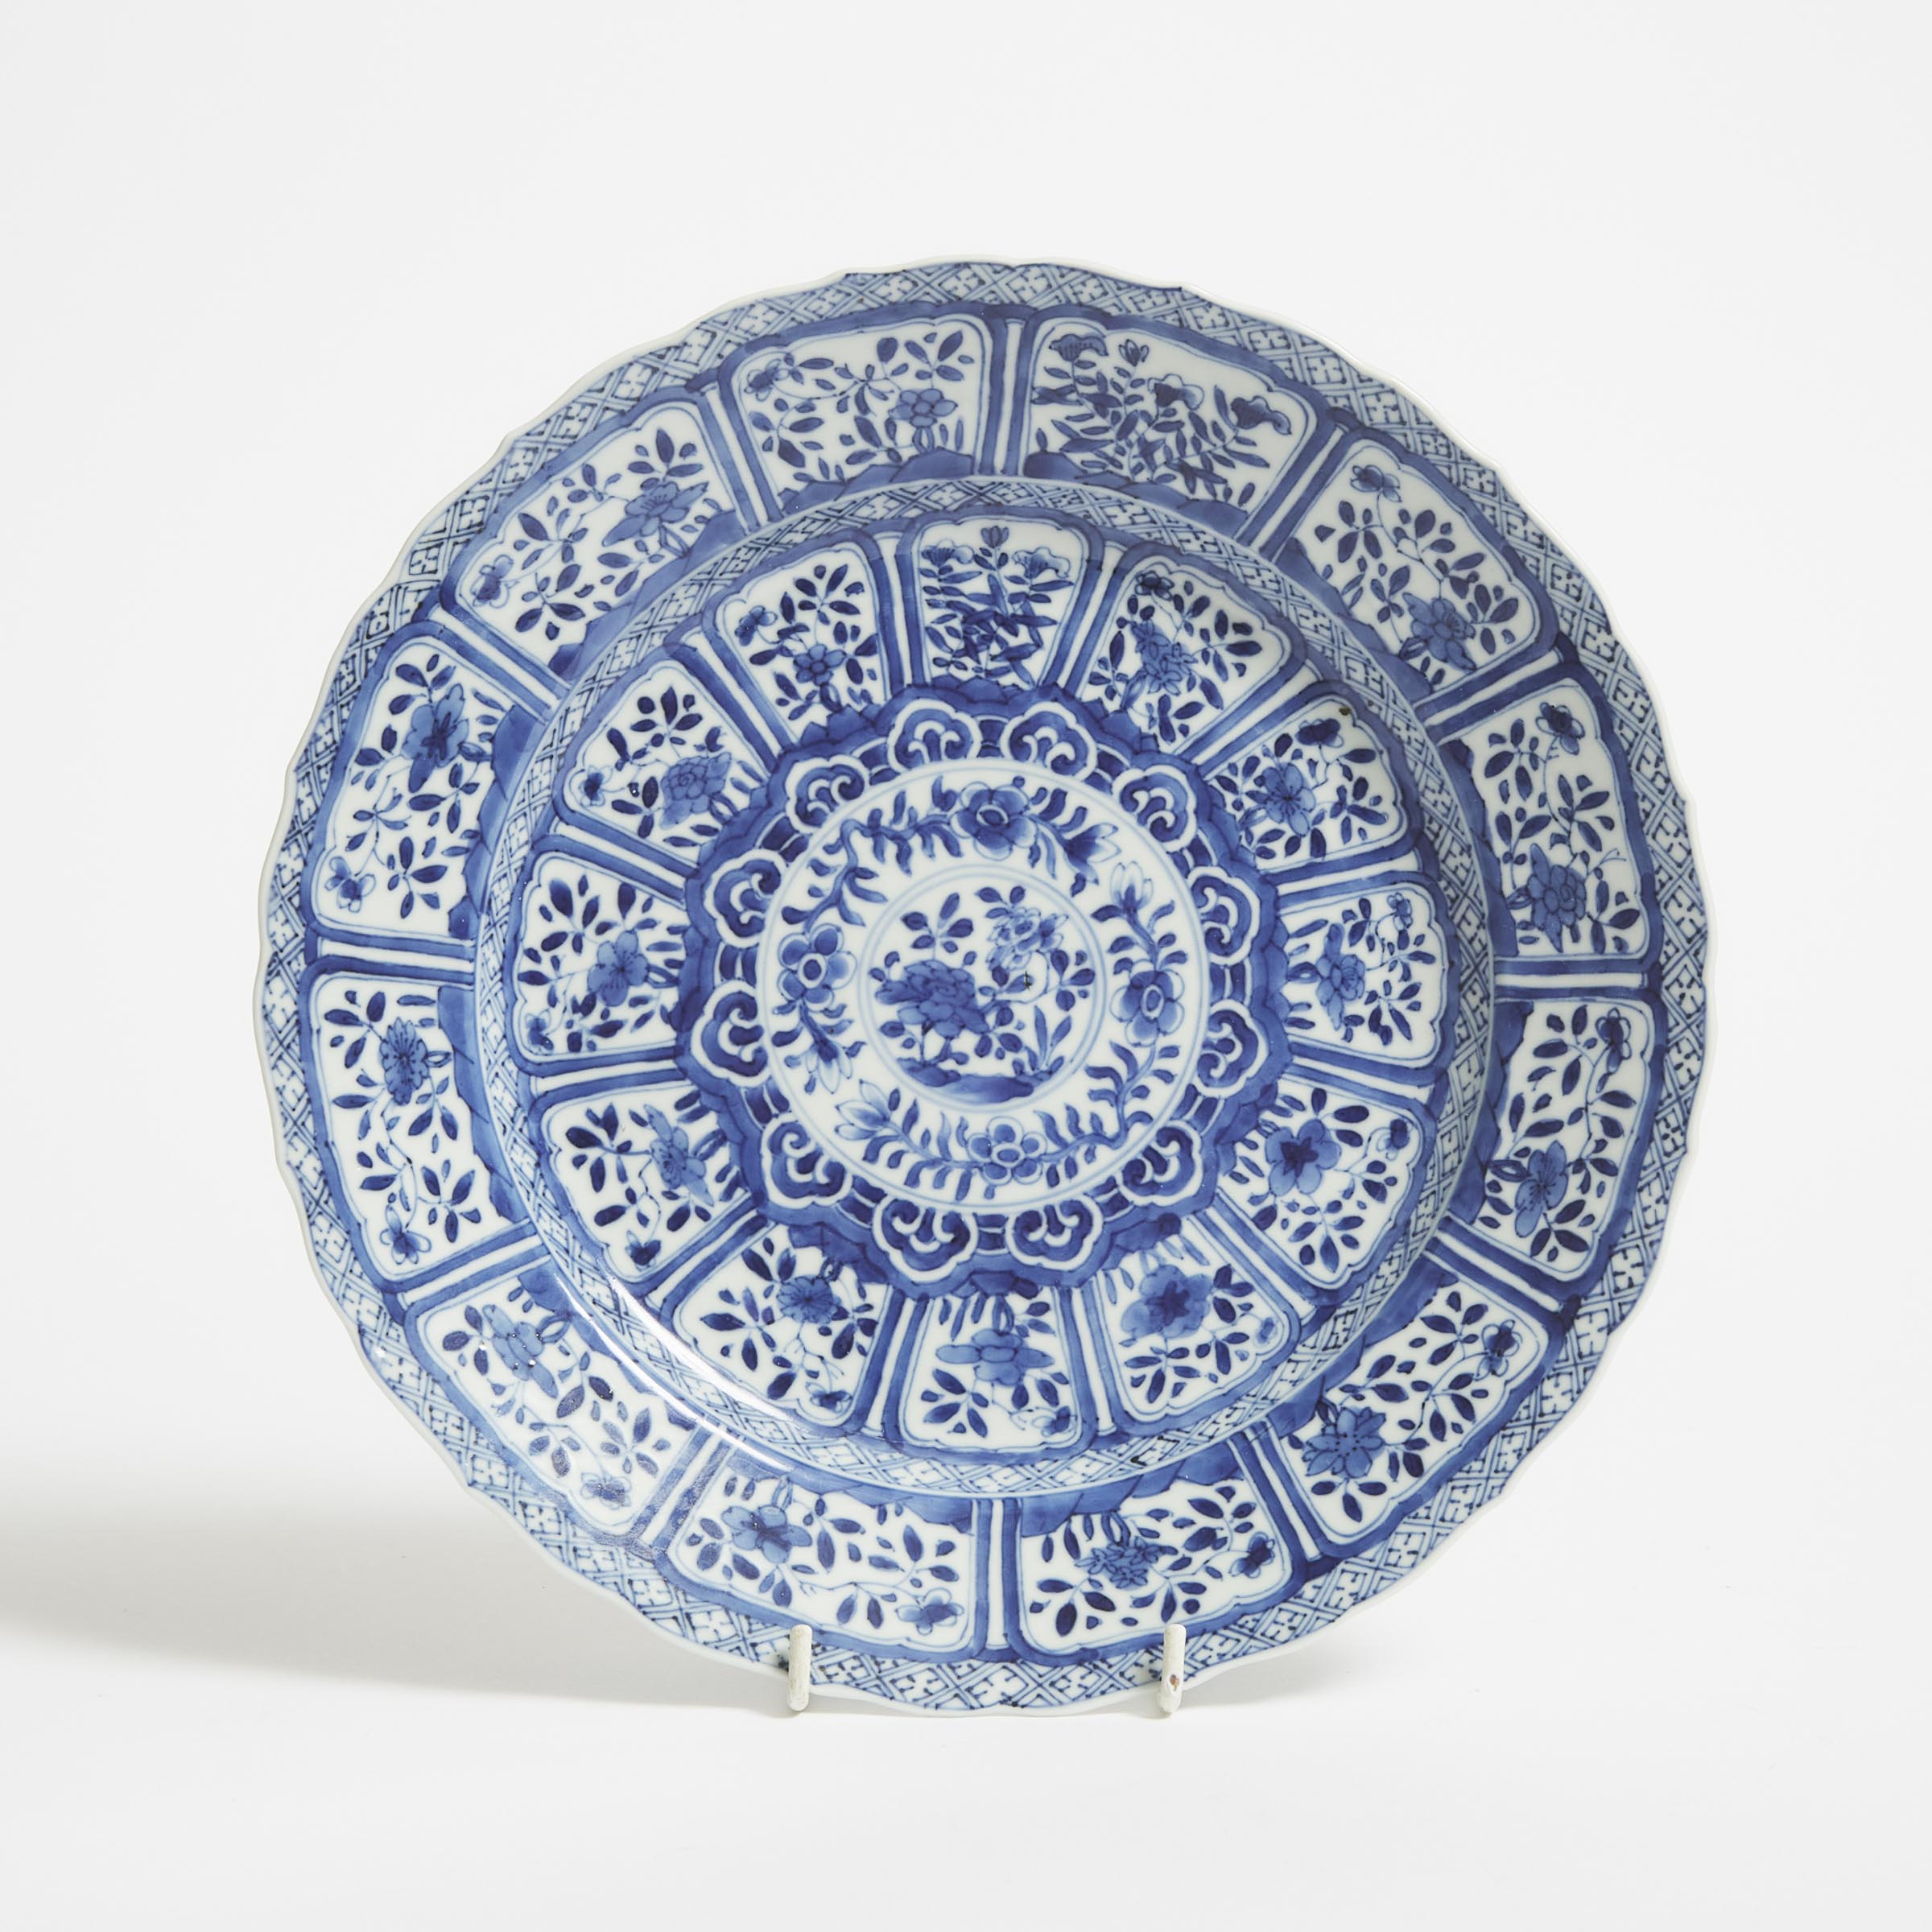 A Blue and White 'Floral' Barbed-Rim